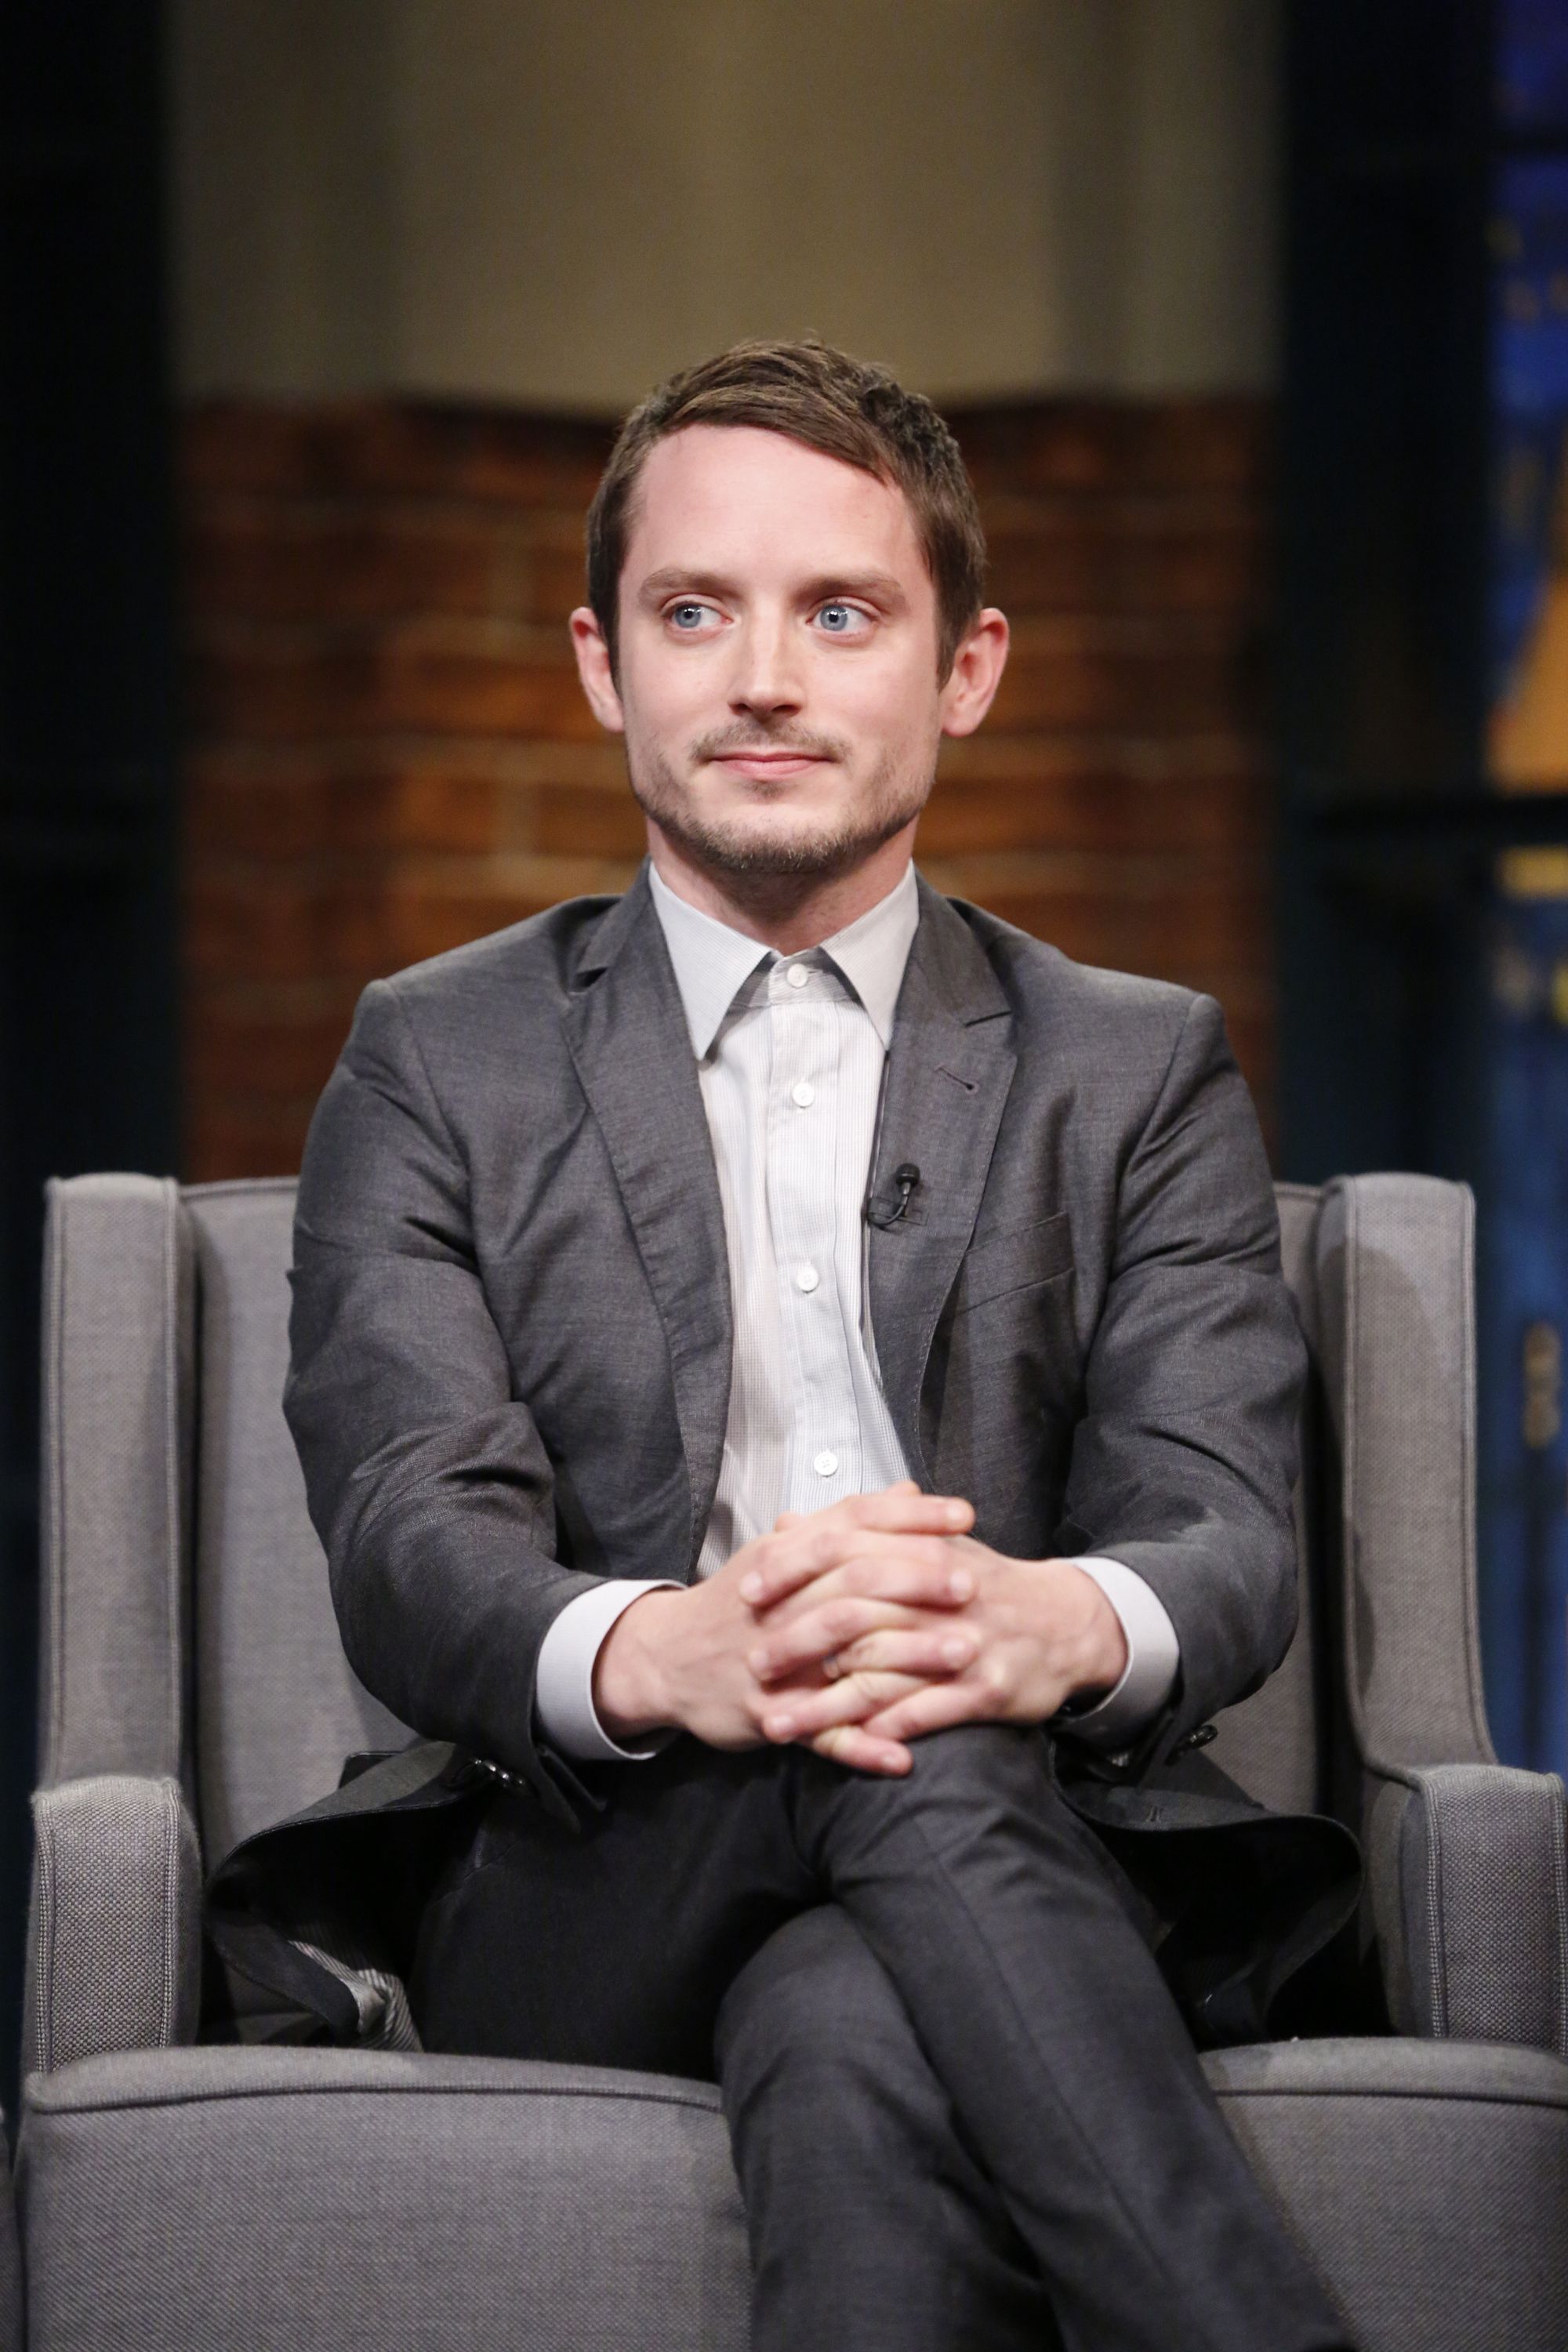 Elijah Wood 'Surprised' By New Lord of the Rings Movies